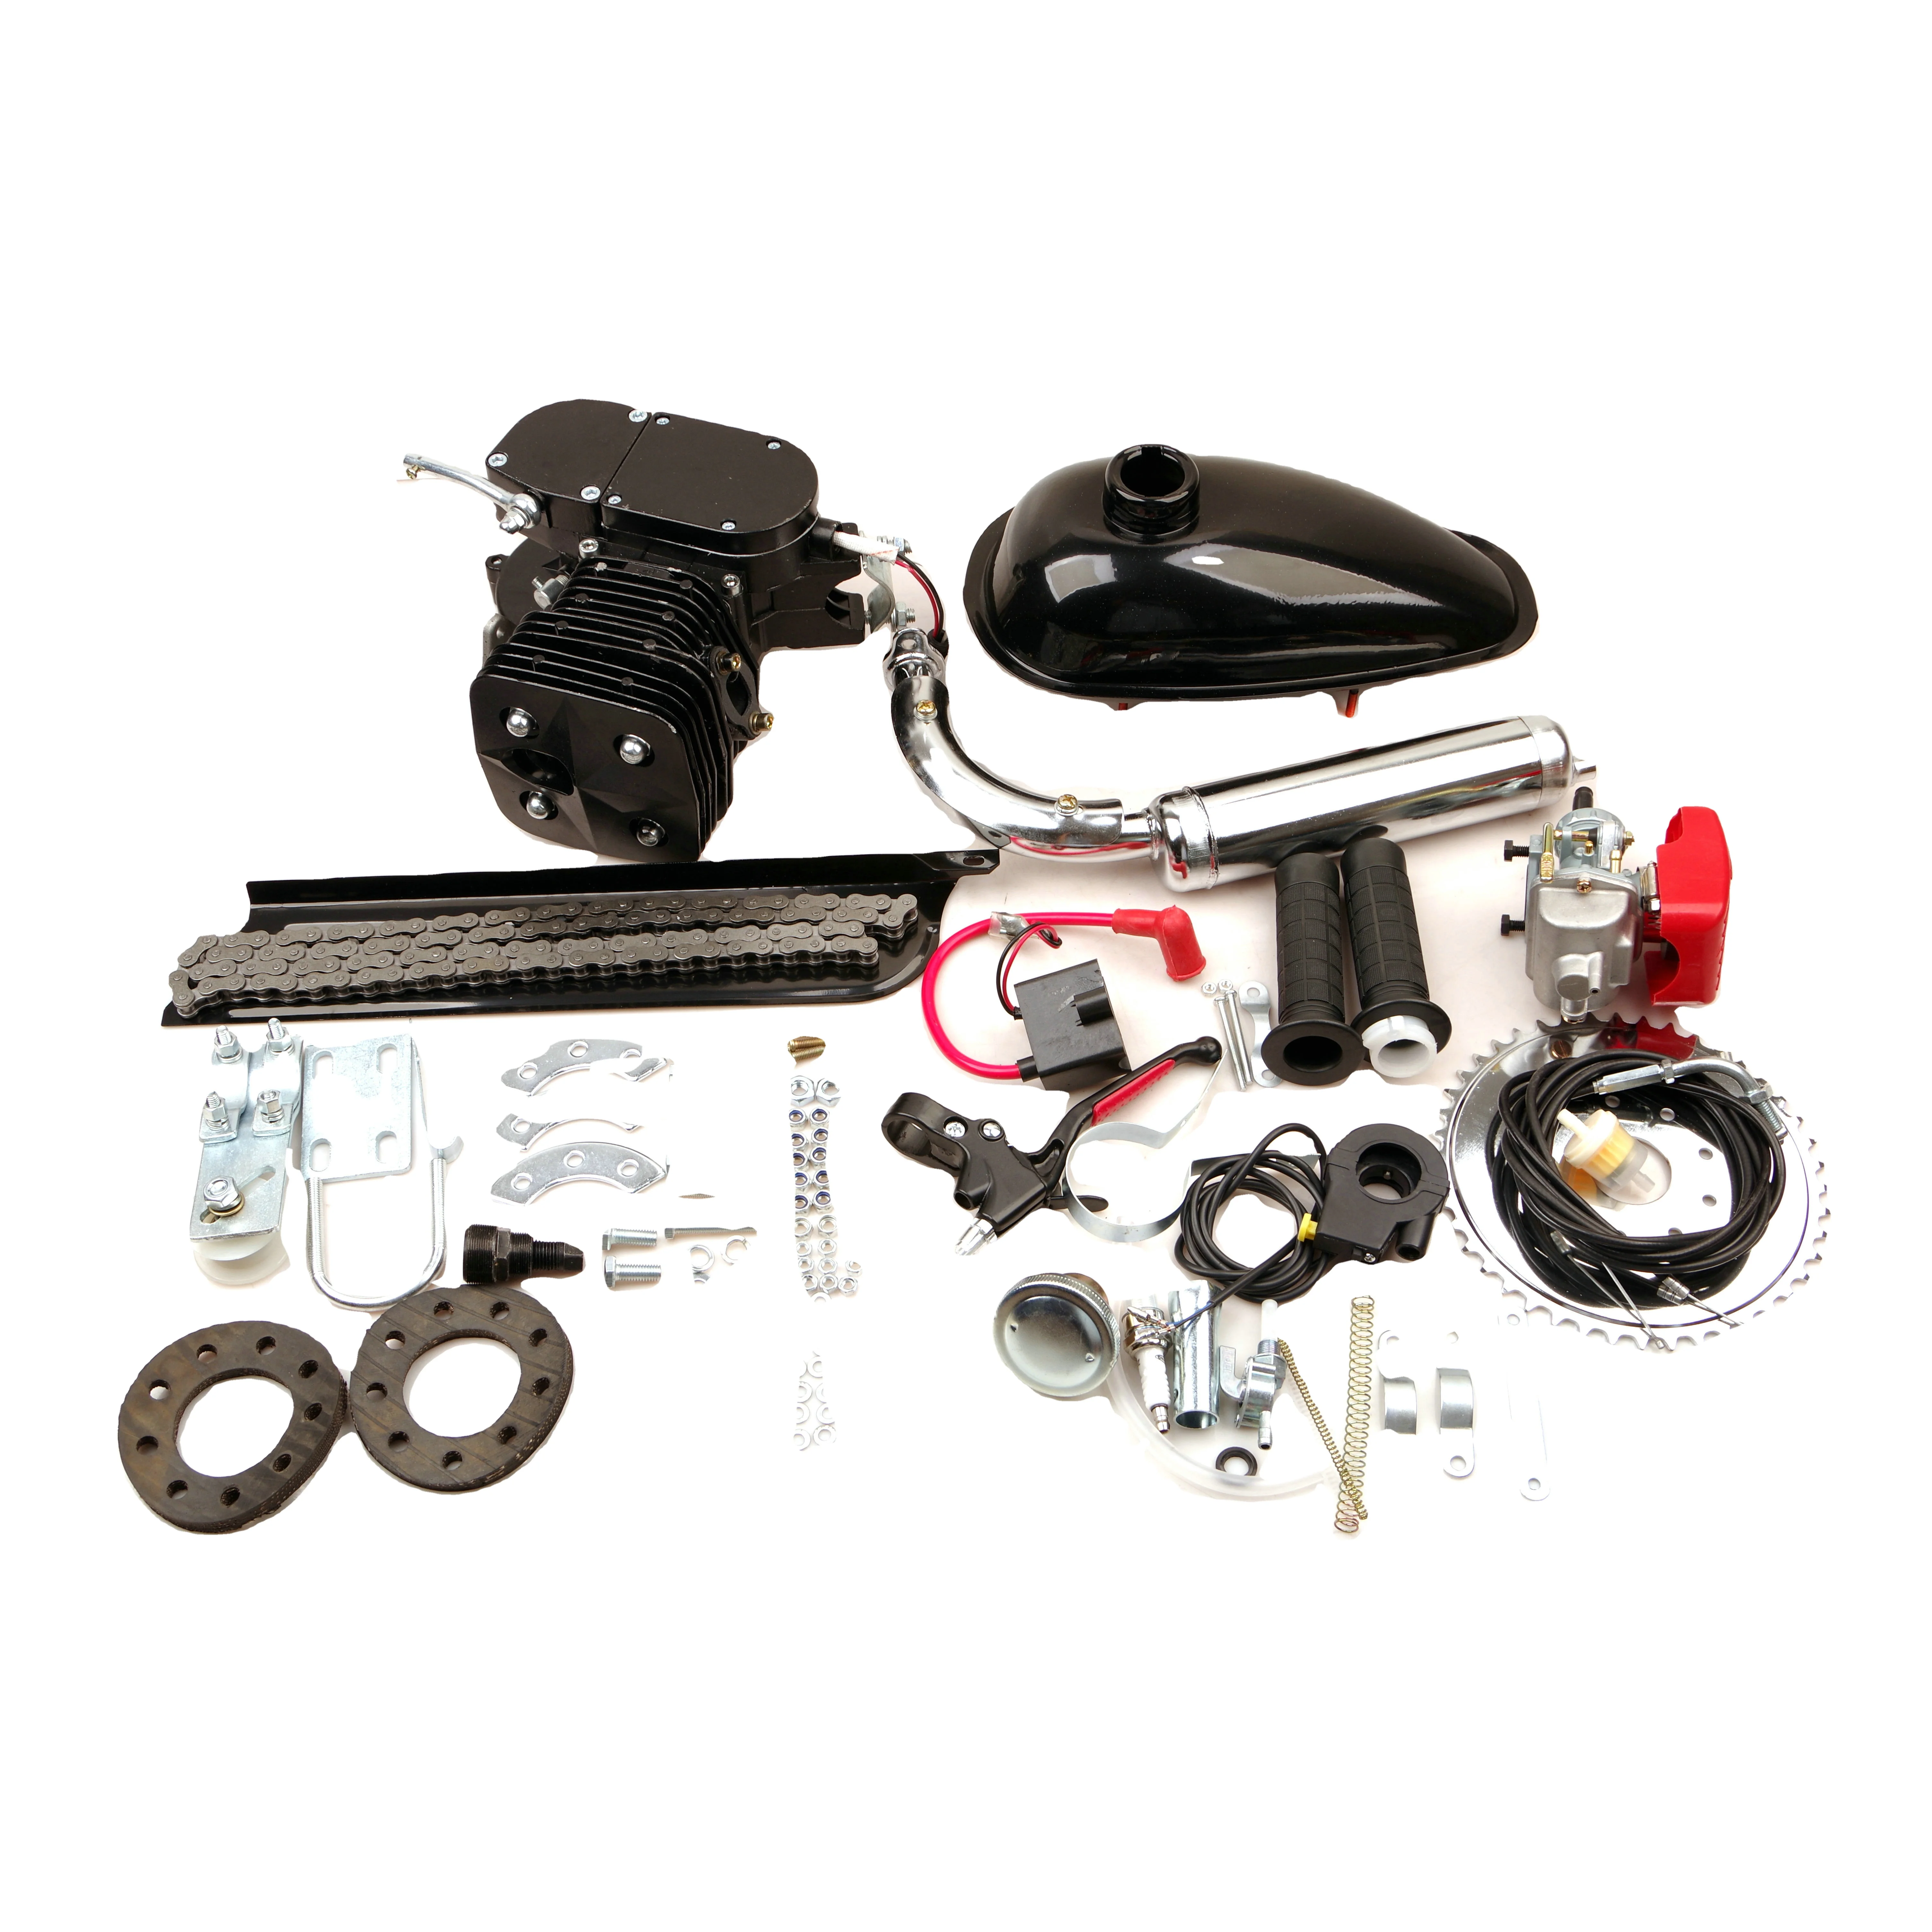 Cheap Motorcycle Kit110cc 2-stroke Gas Engine Kit For Bicycle